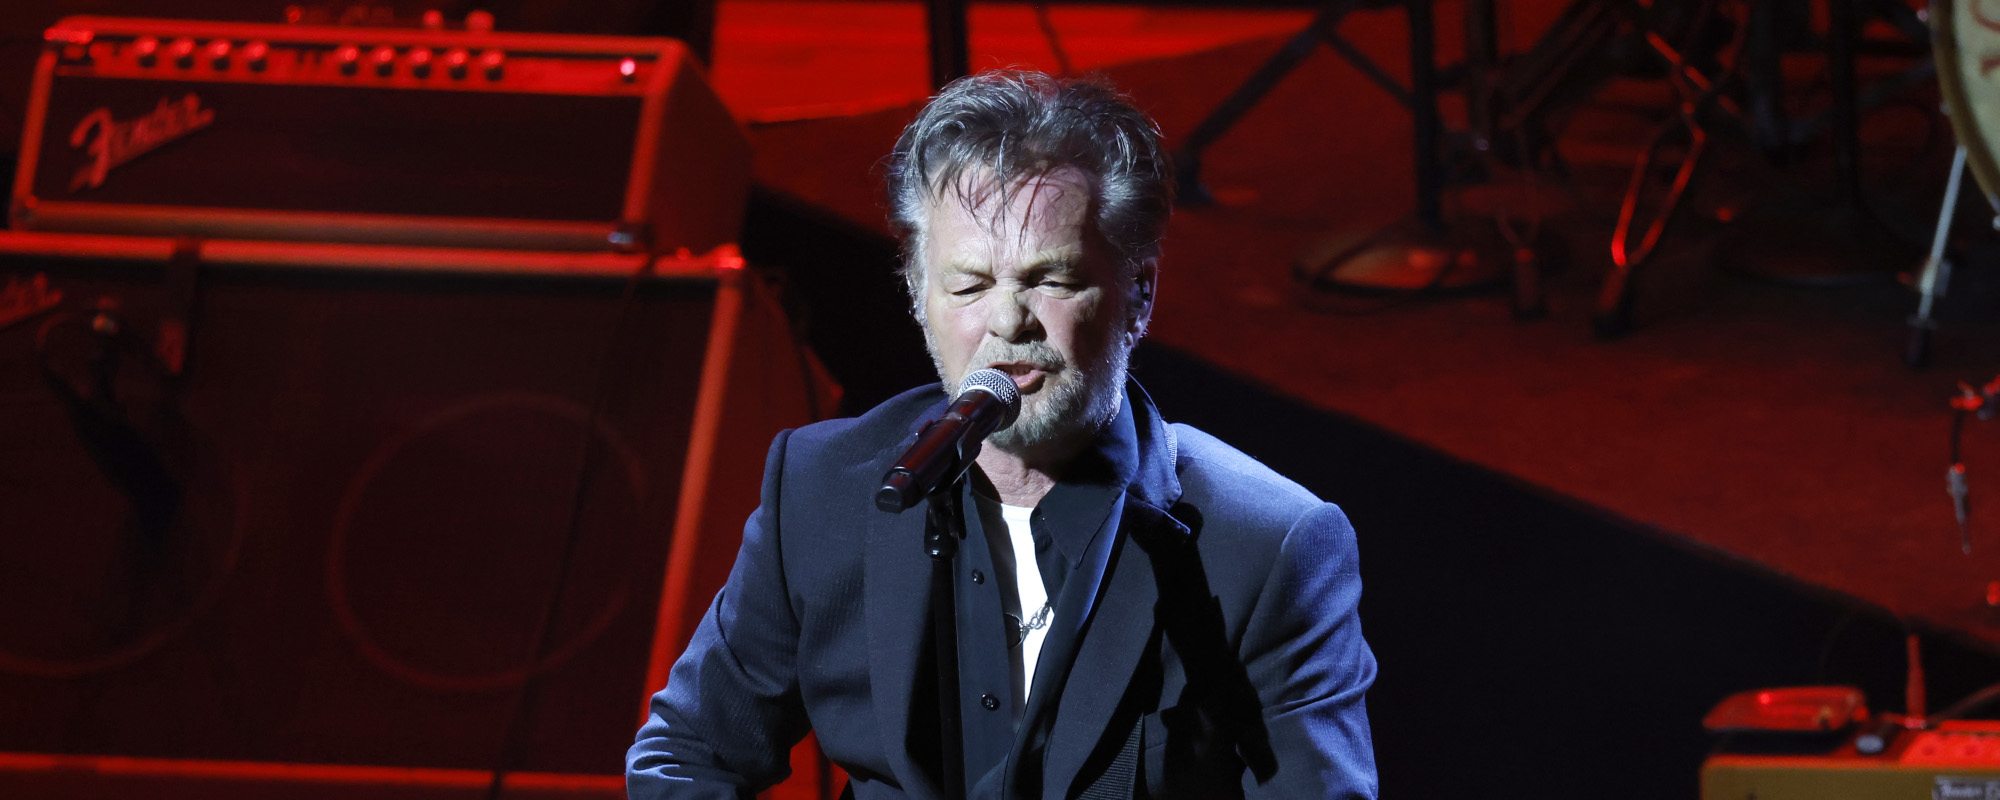 Why John Cougar Mellencamp’s “Small Town” Remains An Iconic Anthem